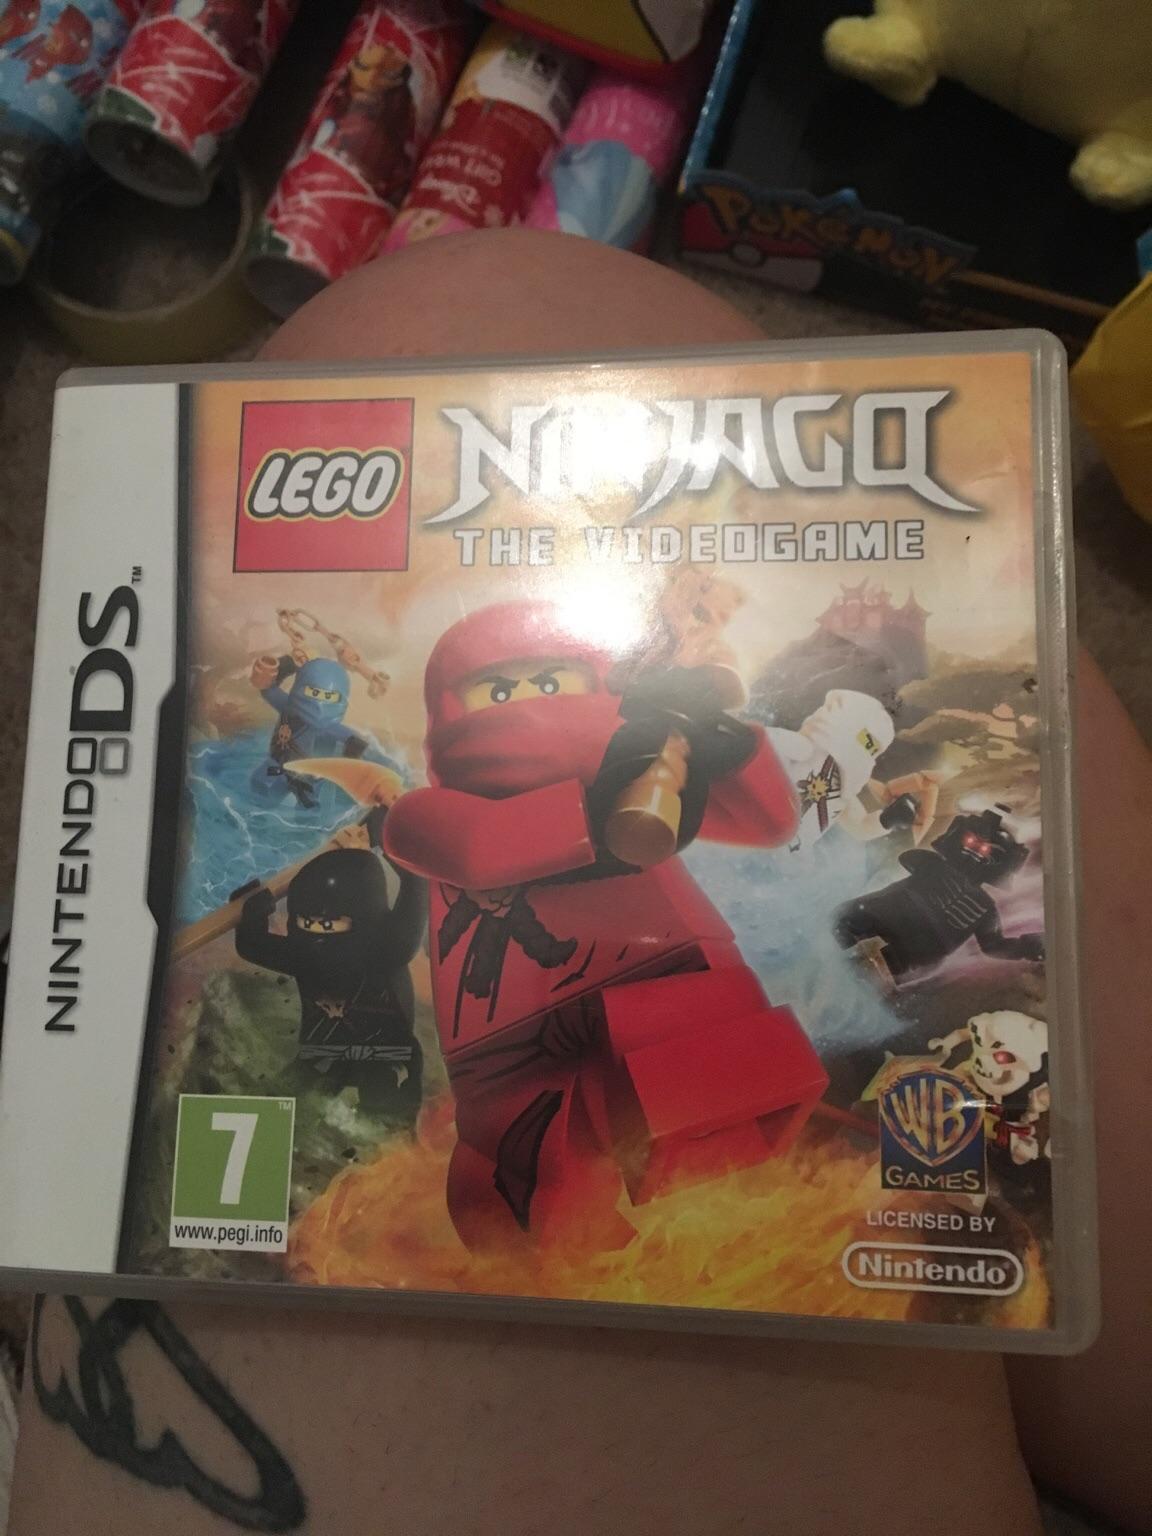 lego-ninjago-ds-game-in-tw4-hounslow-for-8-00-for-sale-shpock